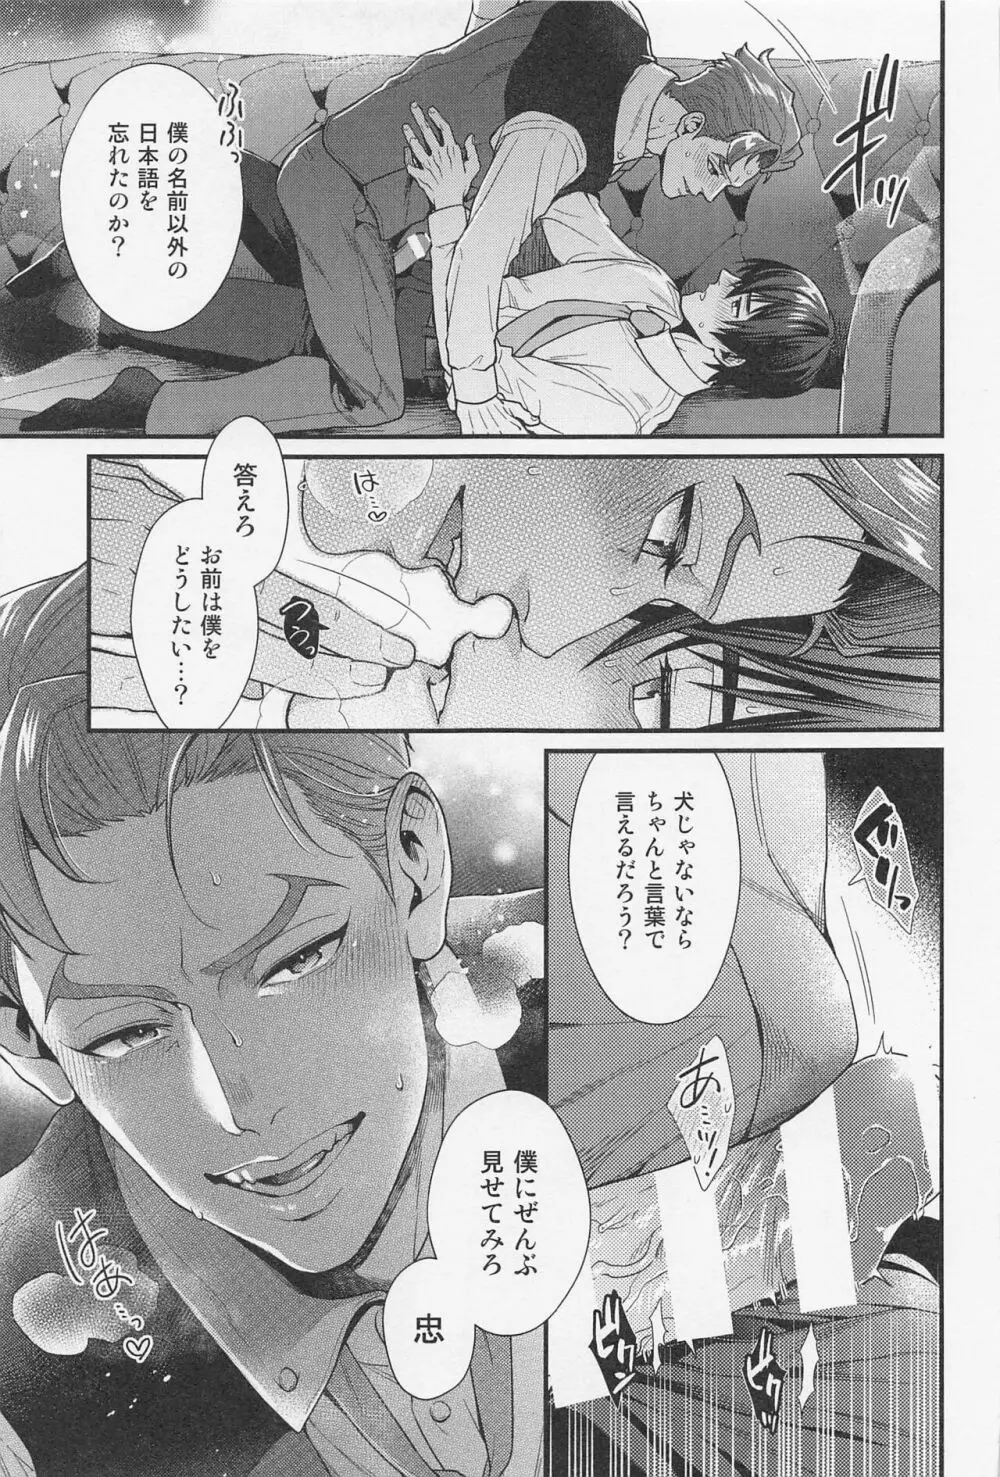 LOVE FIXED POINT - 愛の定点観測 - page12